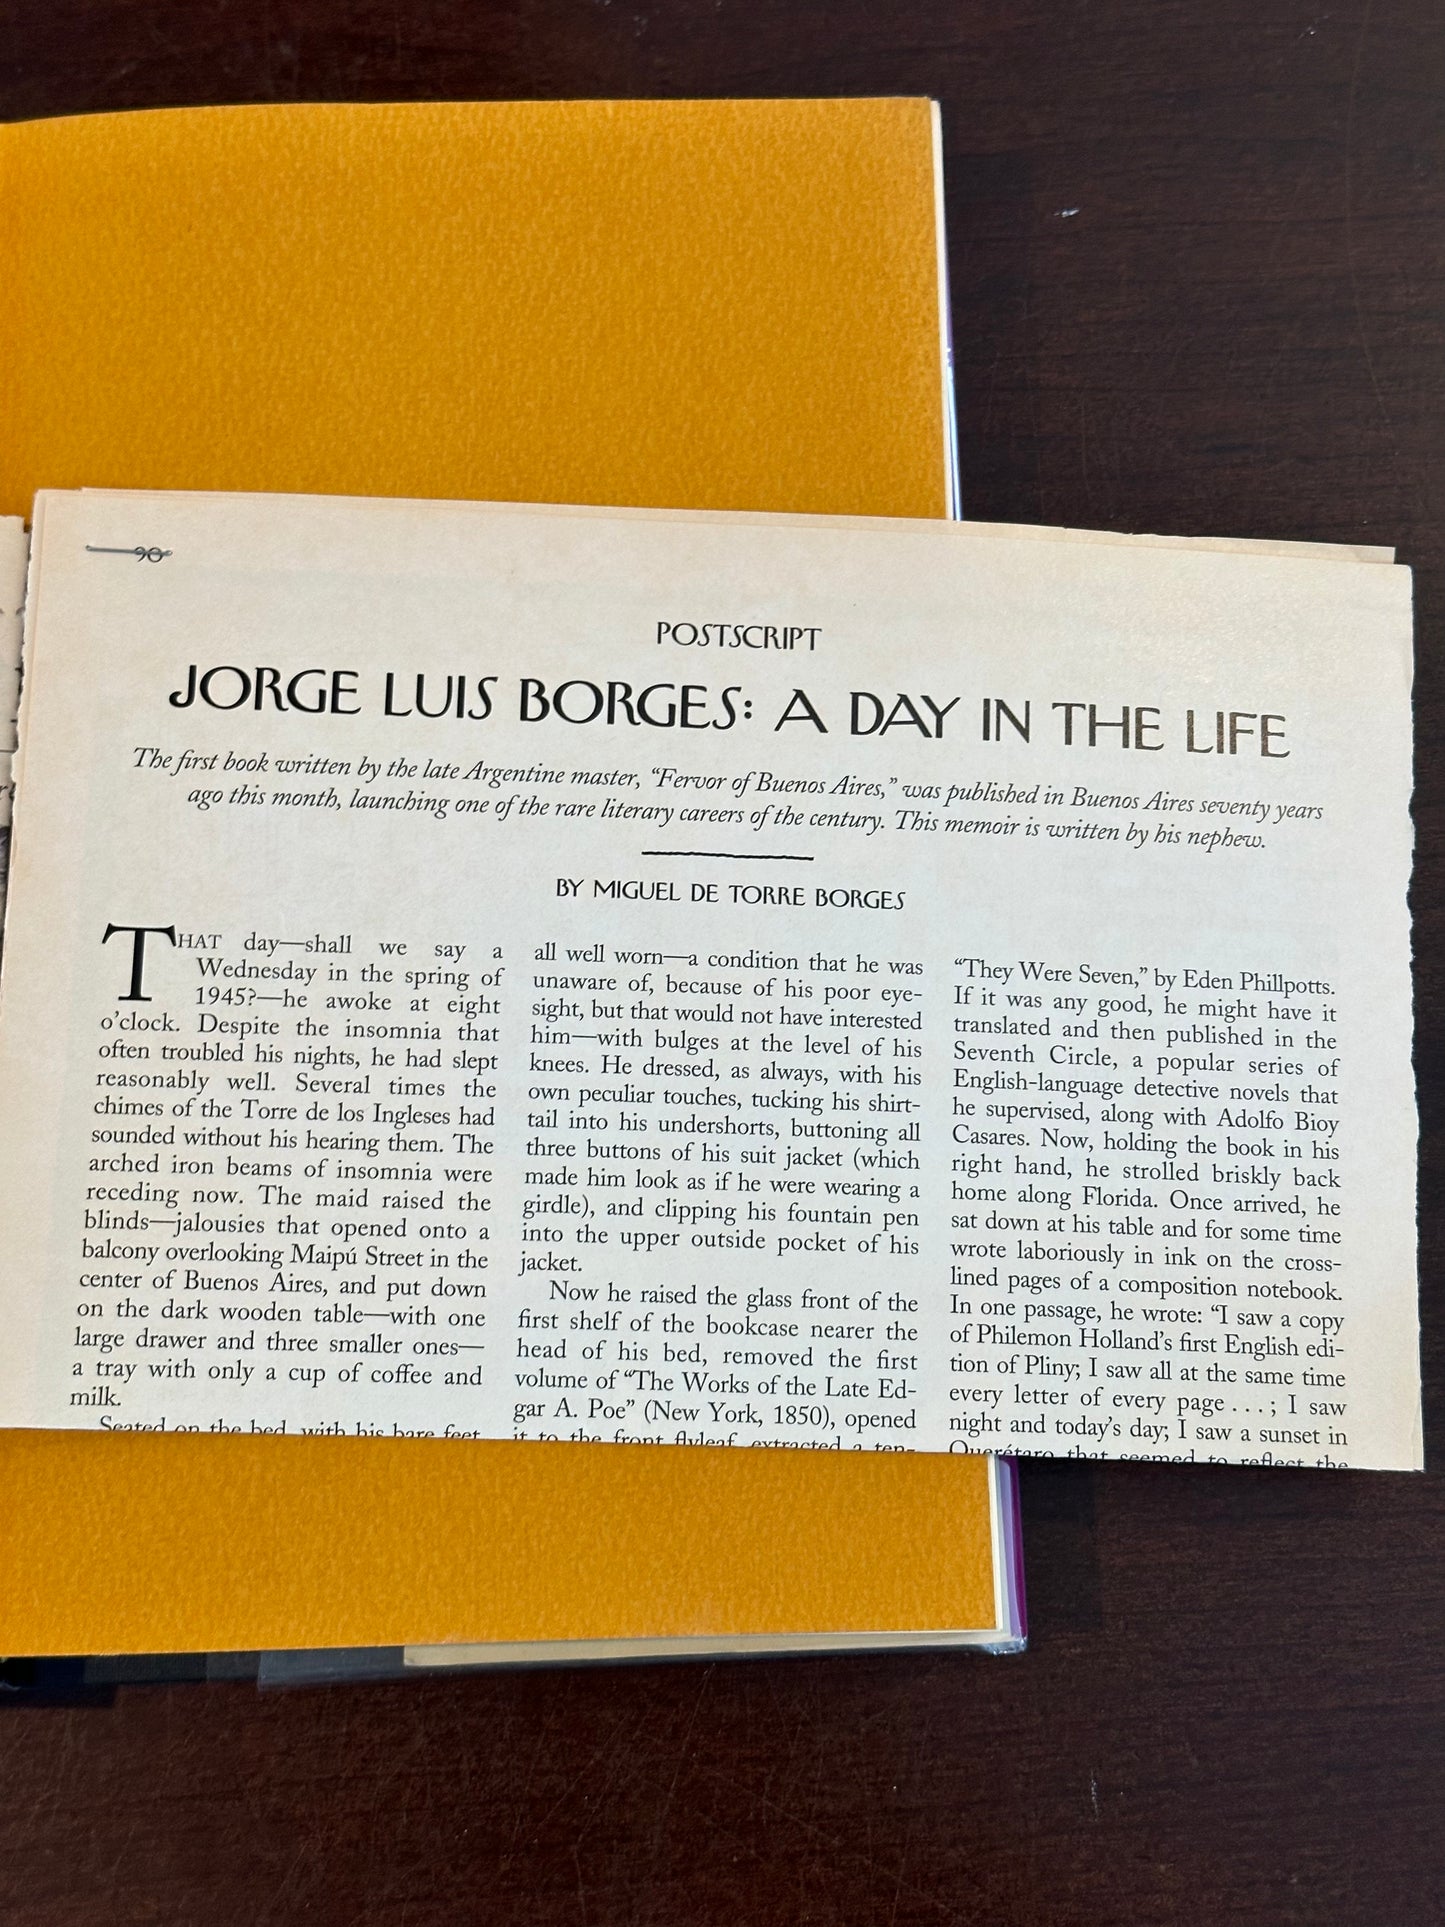 Chronicles of Bustos Domecq by Jorge Luis Borges and Adolfo Bioy-Casares (First Edition)